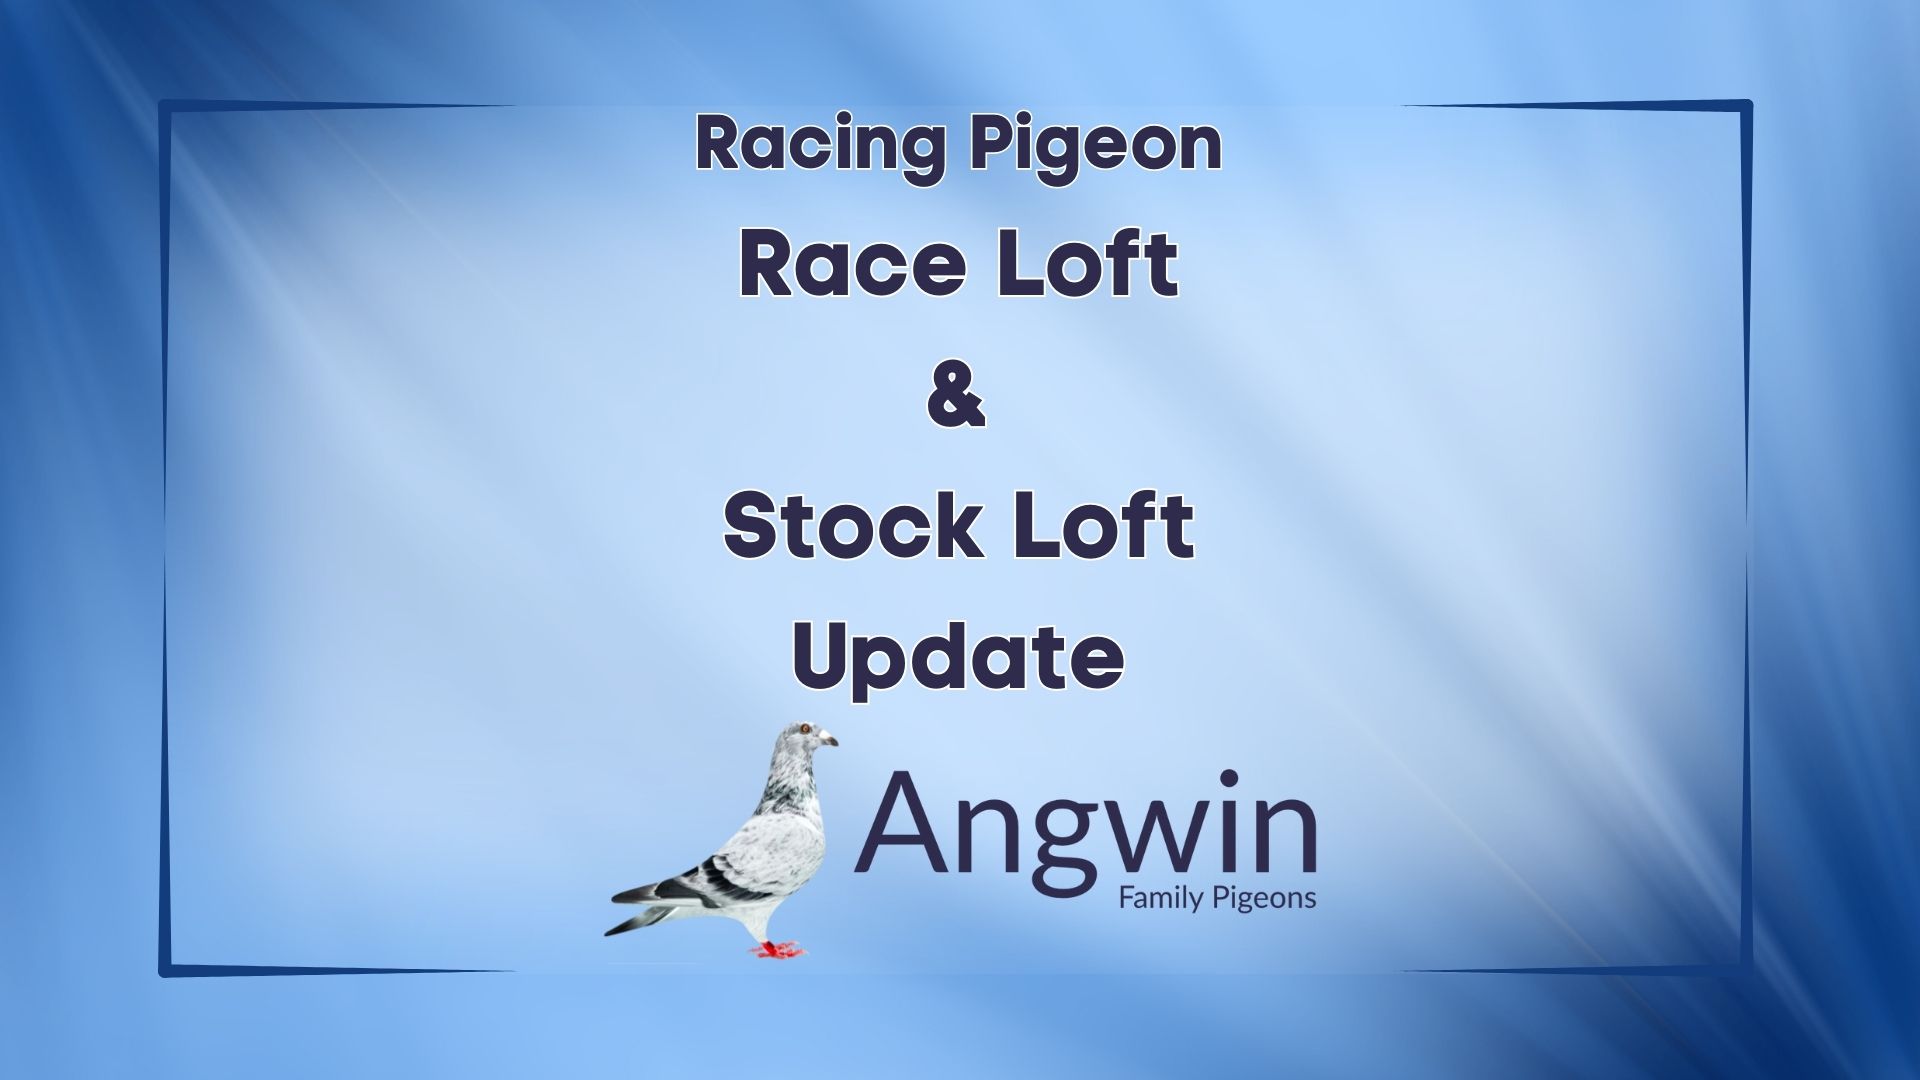 Race Loft & Stock Loft Update from Angwin Family Pigeons